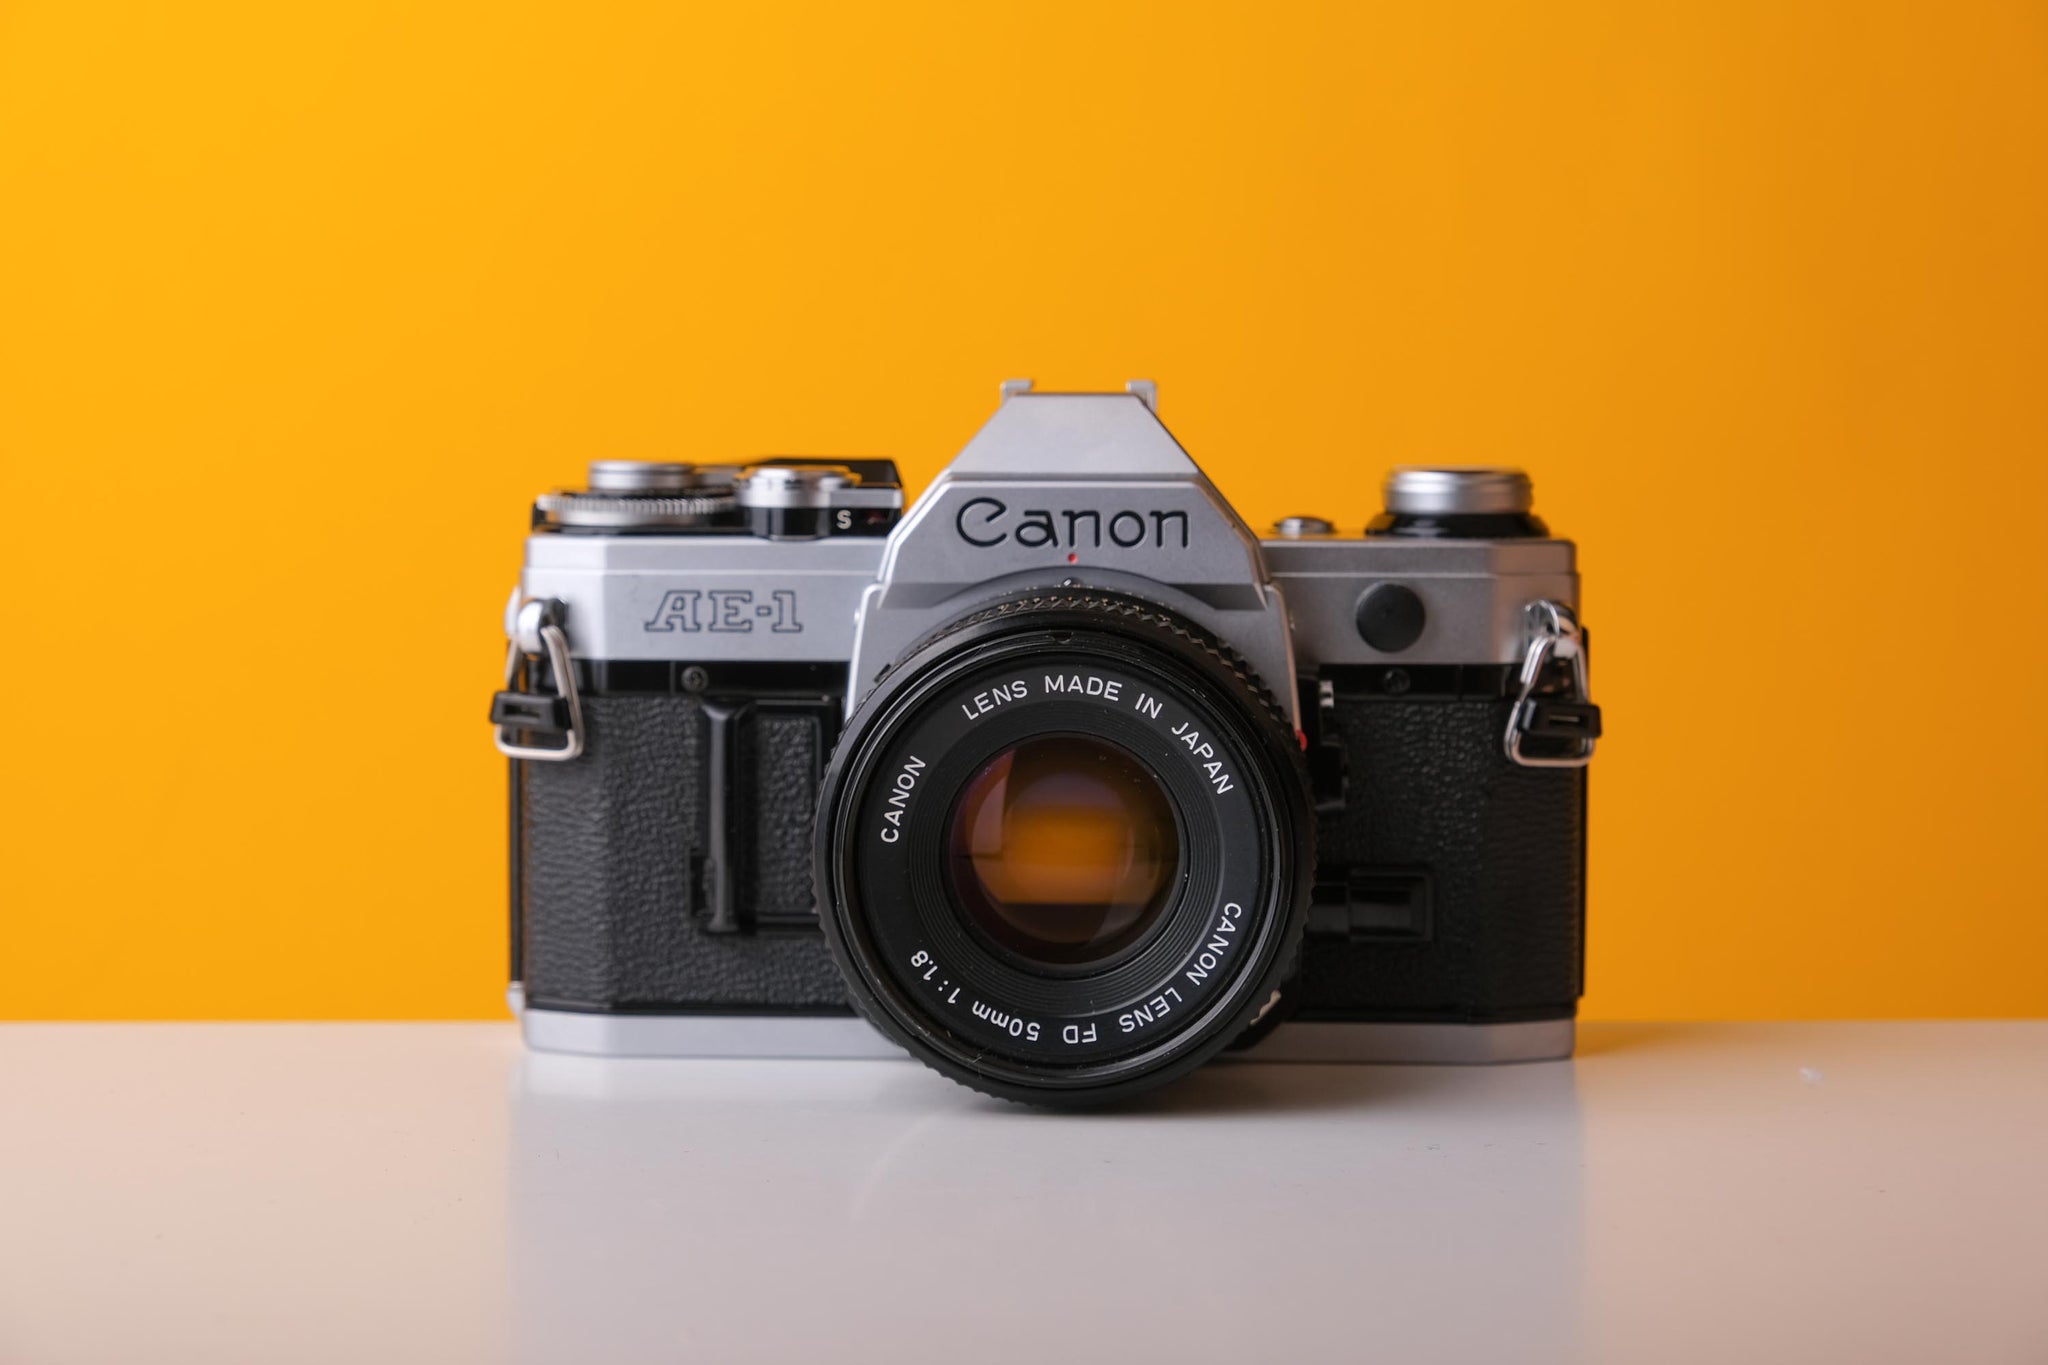 Canon AE-1 35mm SLR Film Camera with Canon 50mm f/1.8 FD Lens - WORKING  PERFECT!